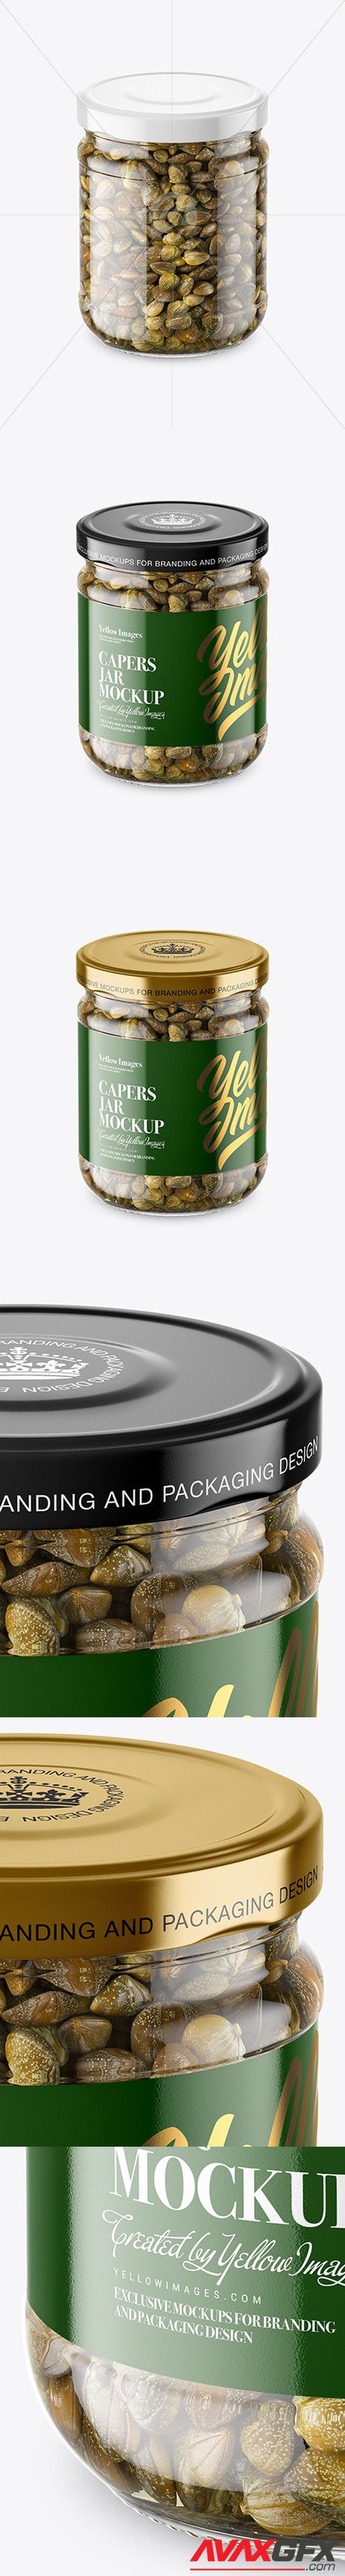 Clear Glass Jar with Capers Mockup 46553 [TIF]